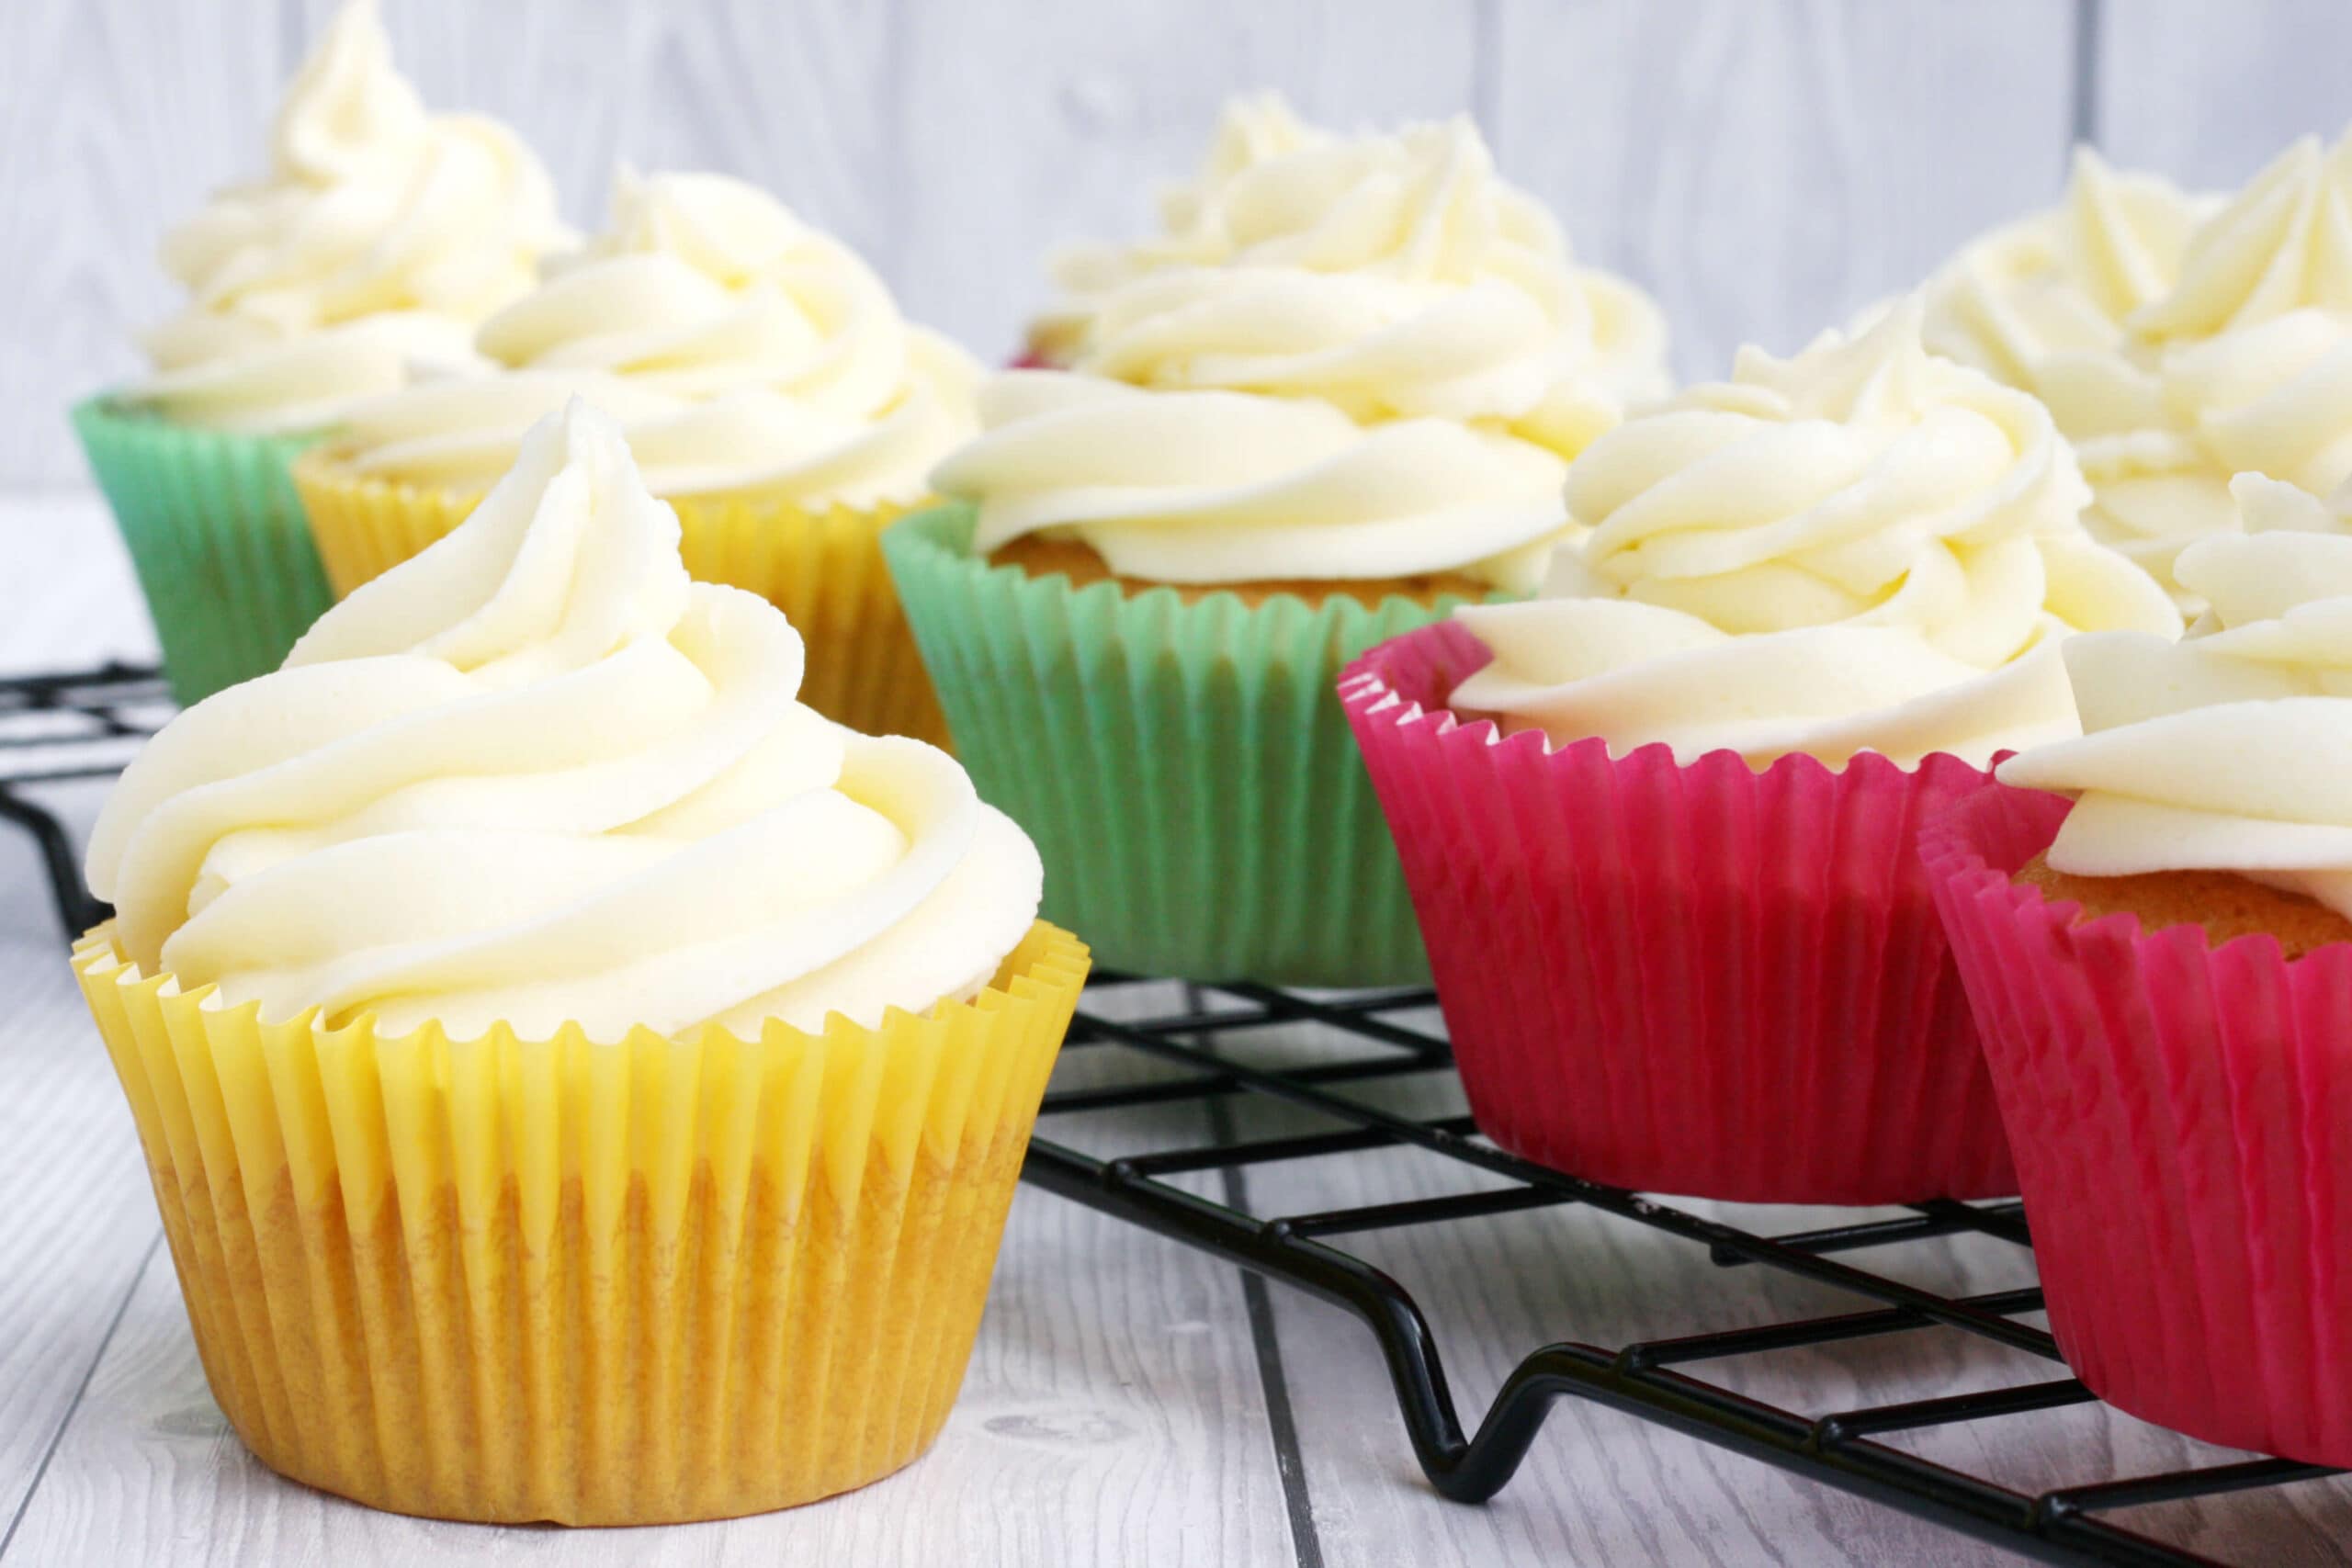 Cup Cake Mould at Home - Instant Muffin Mold - DIY Cupcake Mould